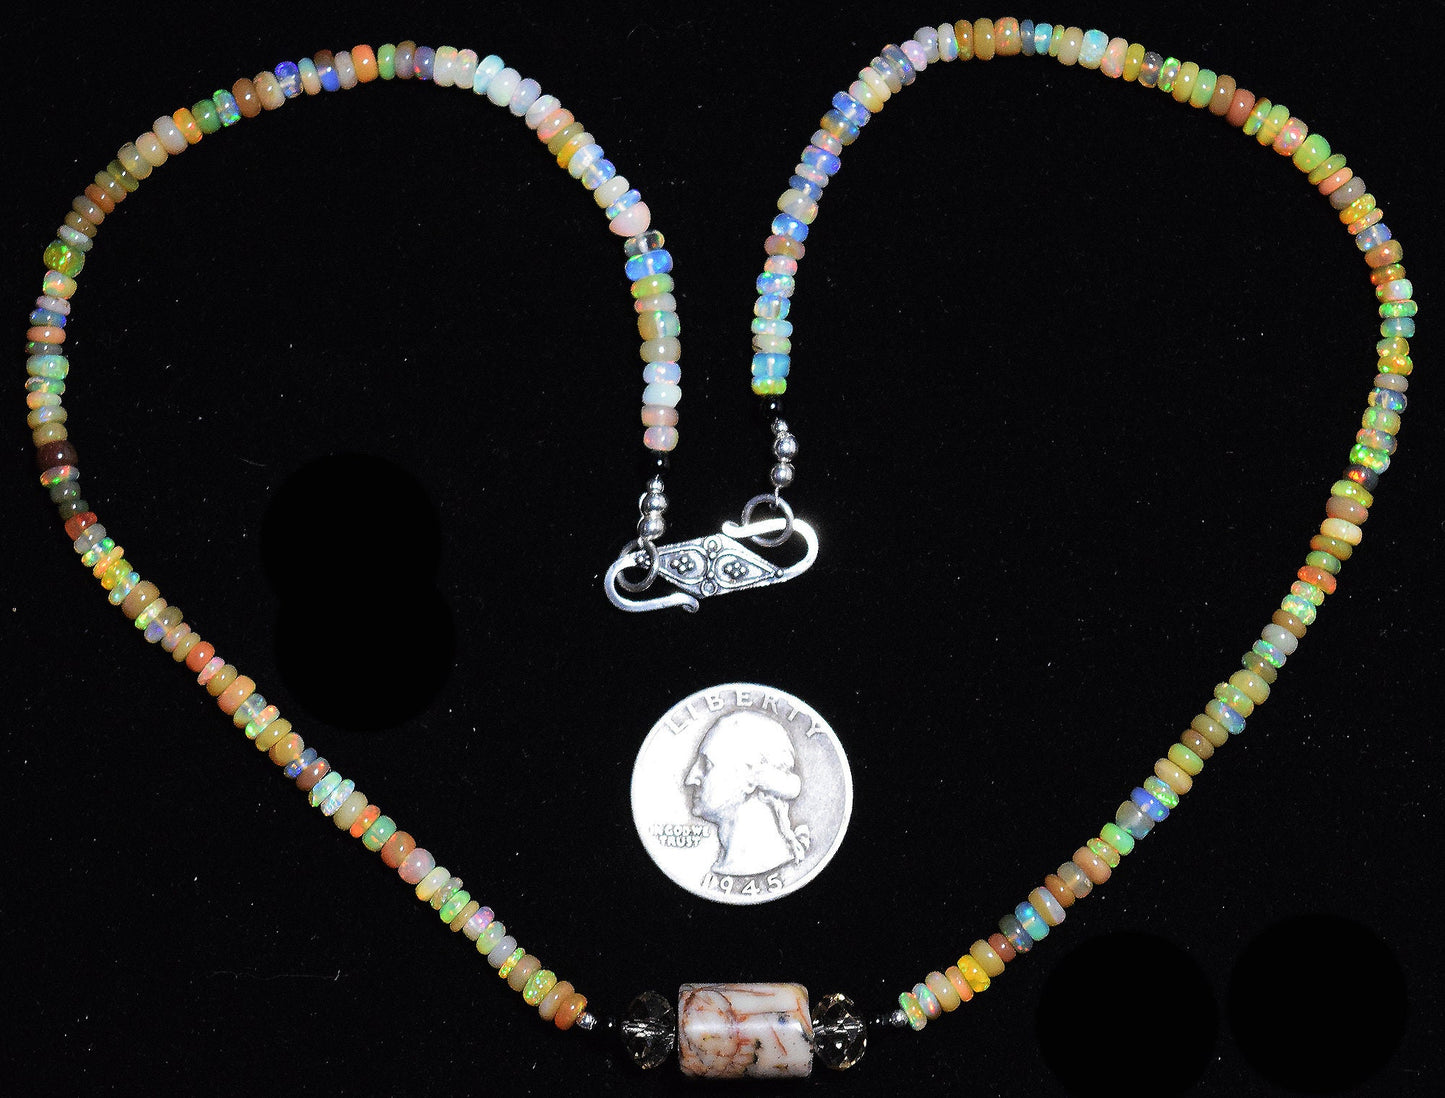 Vibrant Wello Opal necklace with faceted citrine.  18 inch length